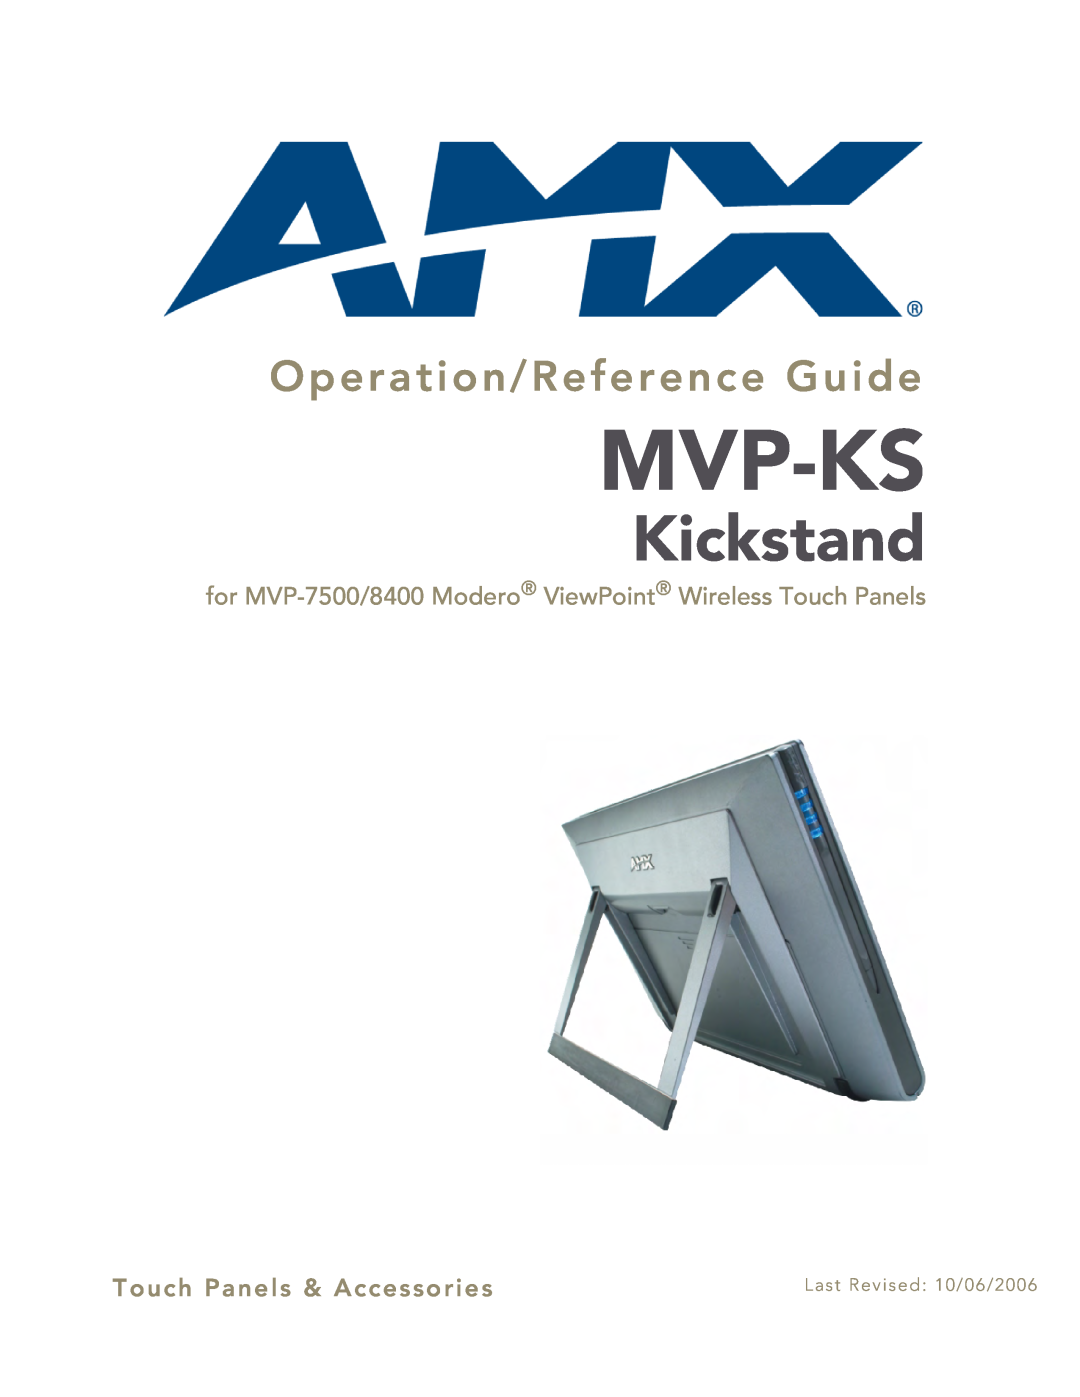 AMX MVP-KS manual Mvp-Ks, Kickstand, Operation/Reference Guide, Touch Panels & Accessories, Last Revised 10/06/2006 